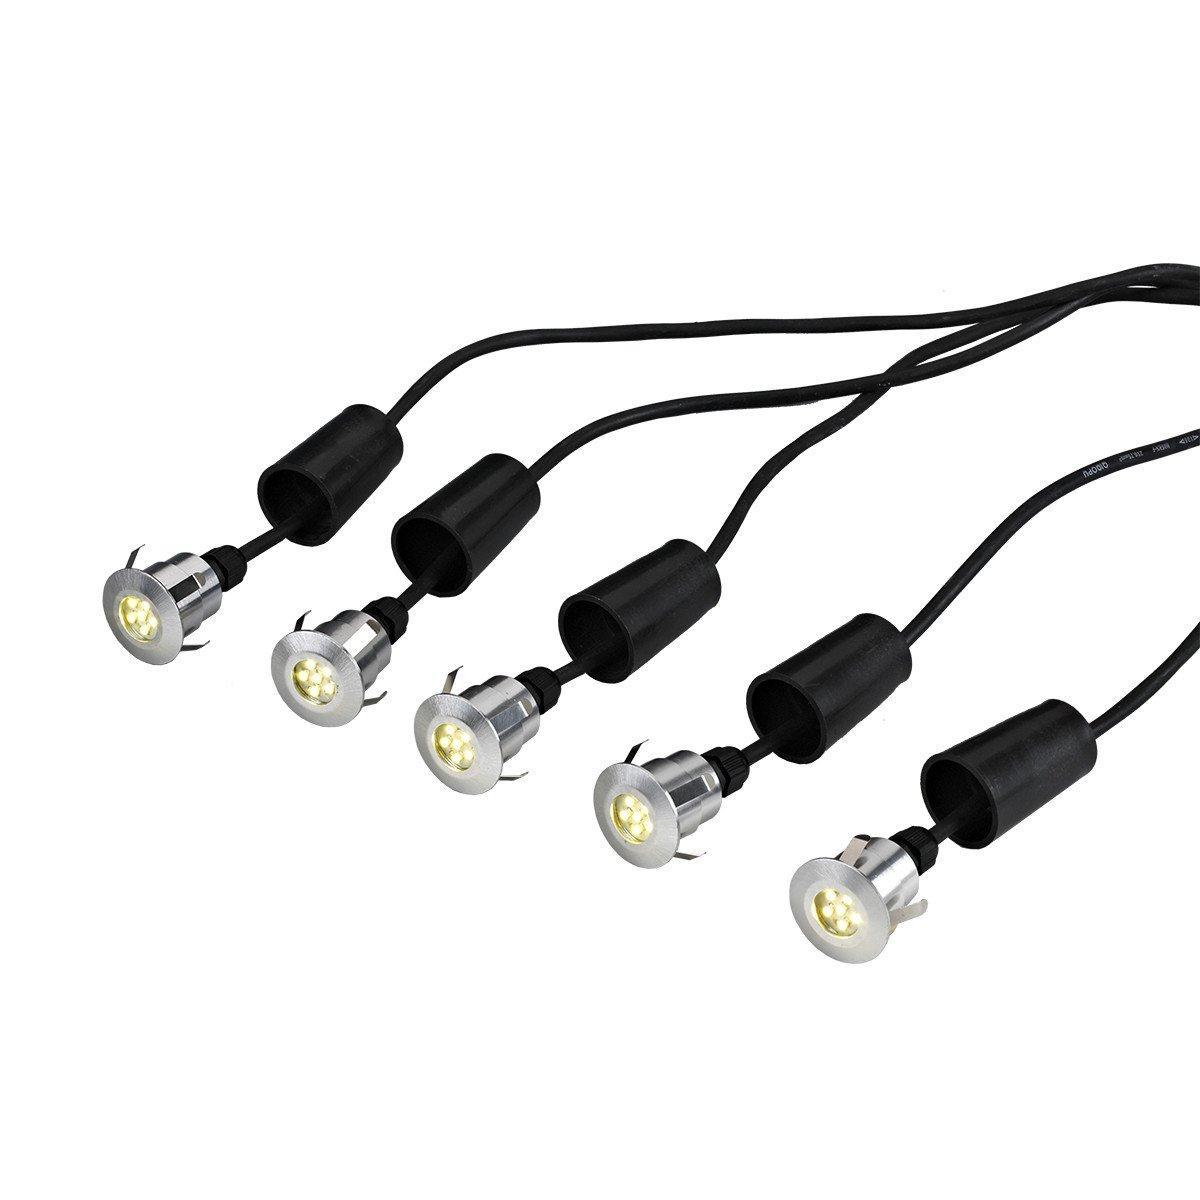 Derwent 5 x Deck Garden light with 6m cable and 12V Transformer IP54